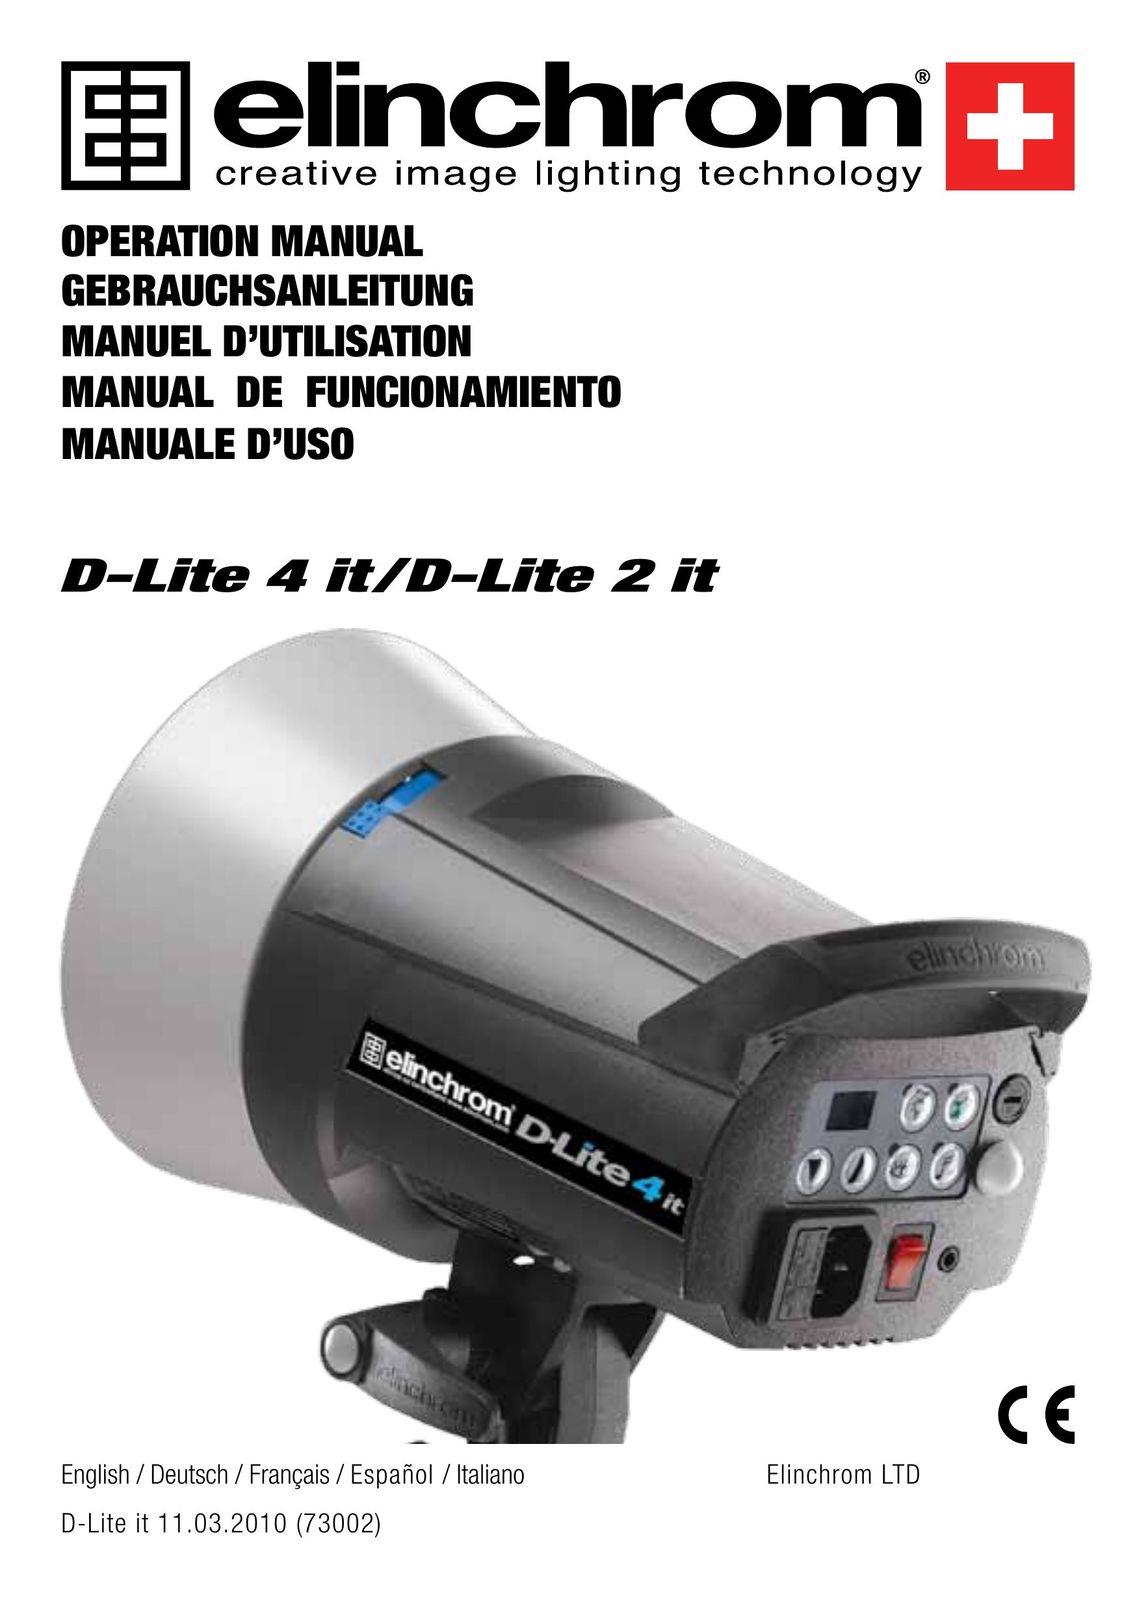 Elinchrom 2 IT Home Safety Product User Manual